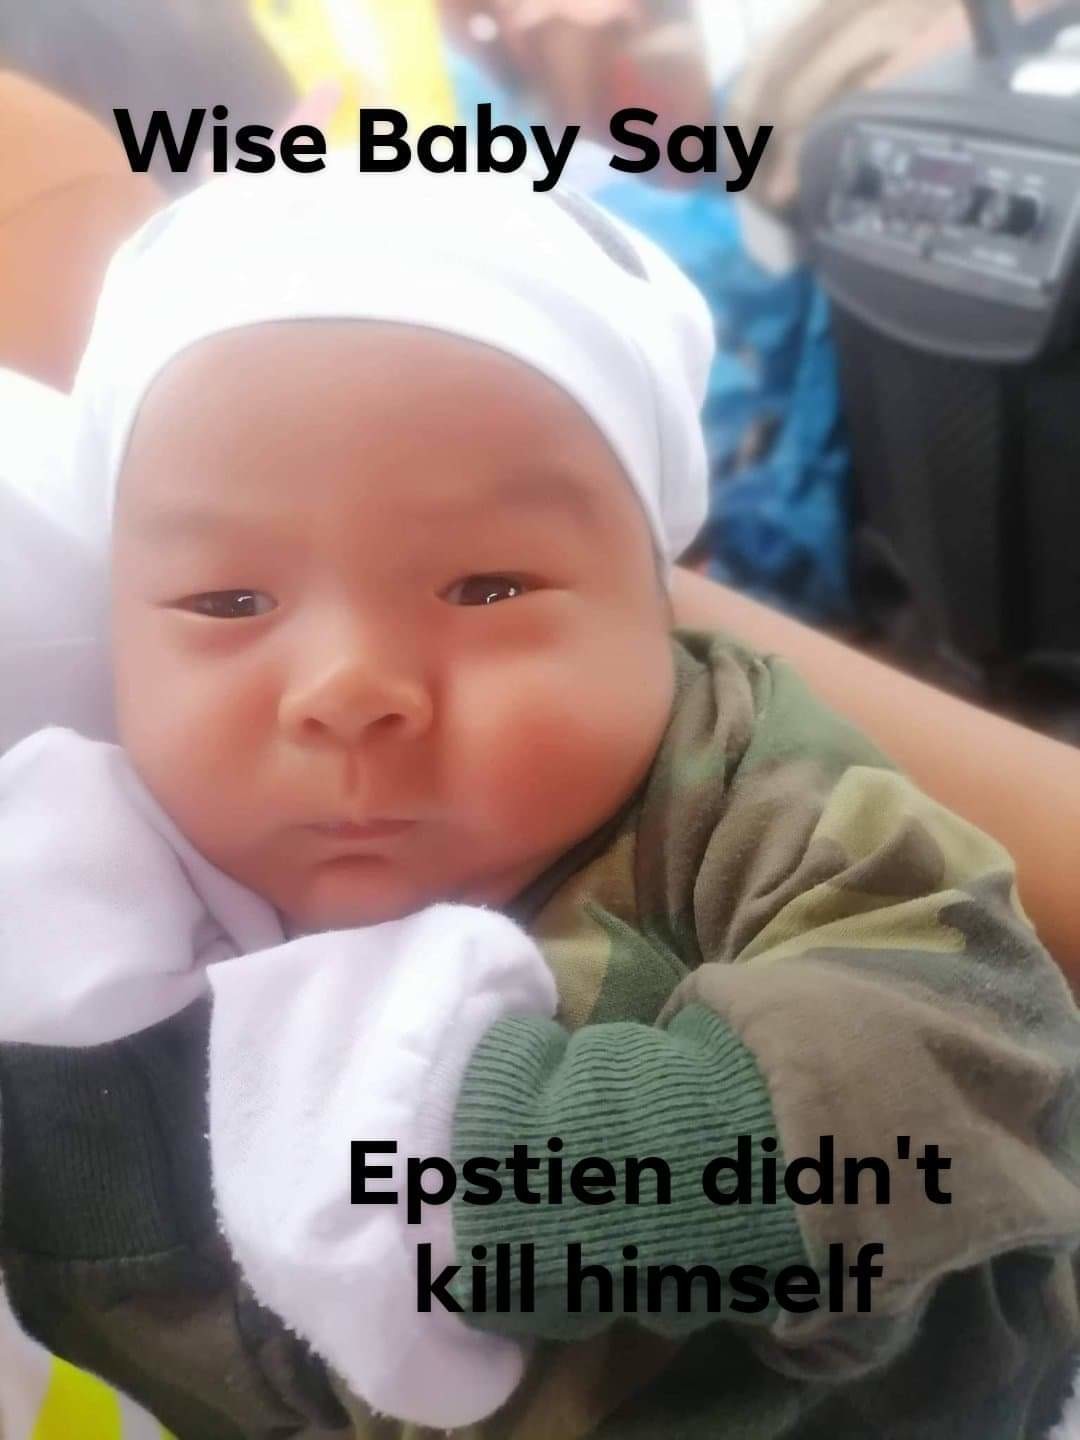 Wise Baby is actually original - meme